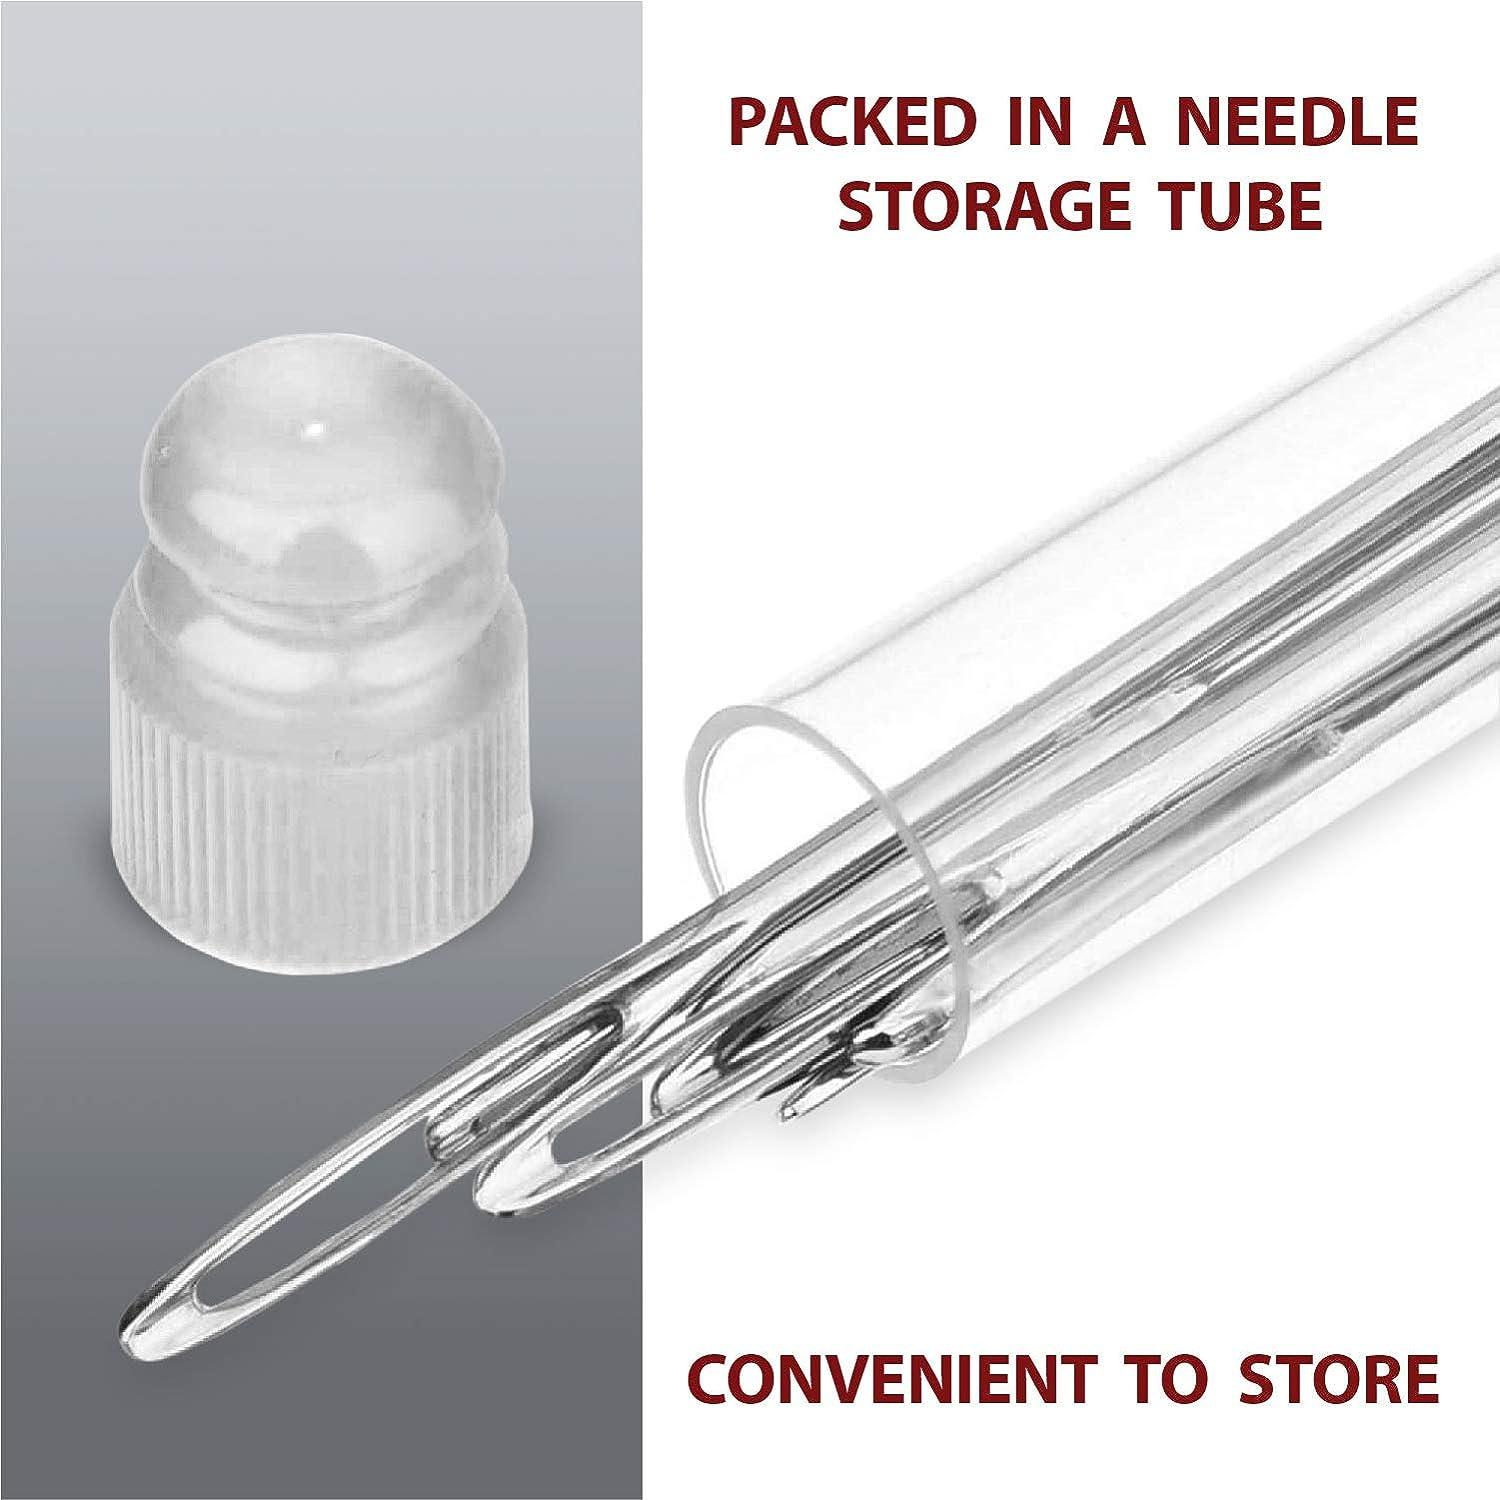 25 Pcs Large Eye Sharp Sewing Needles - Stainless Steel Hand Quilting Needles in A Handy Storage Tube